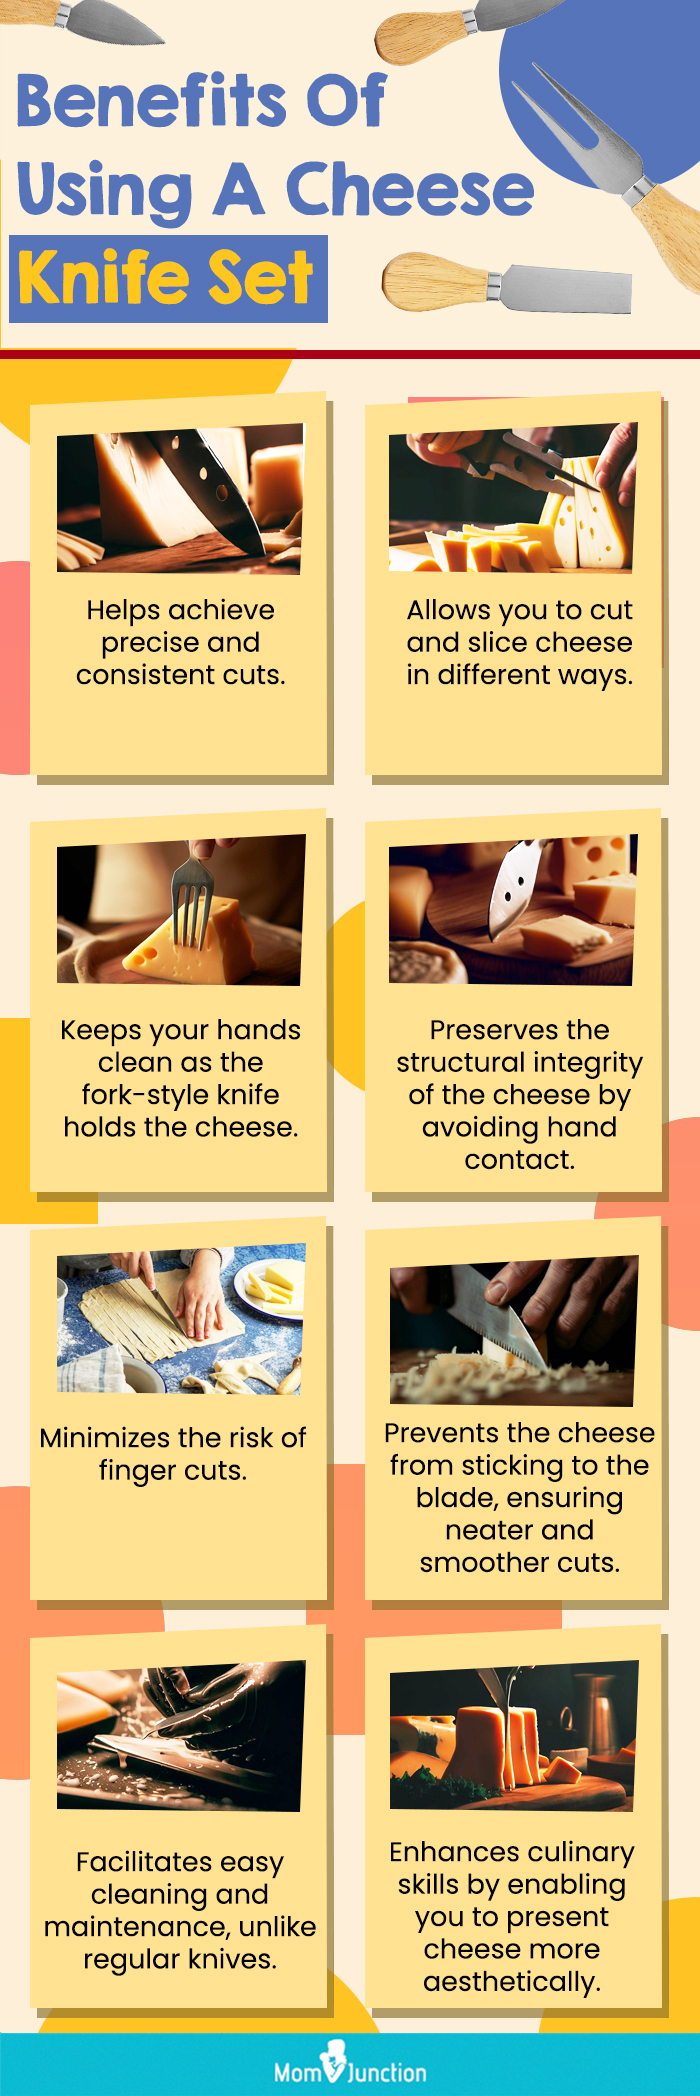 Benefits Of Using A Cheese Knife Set (infographic)